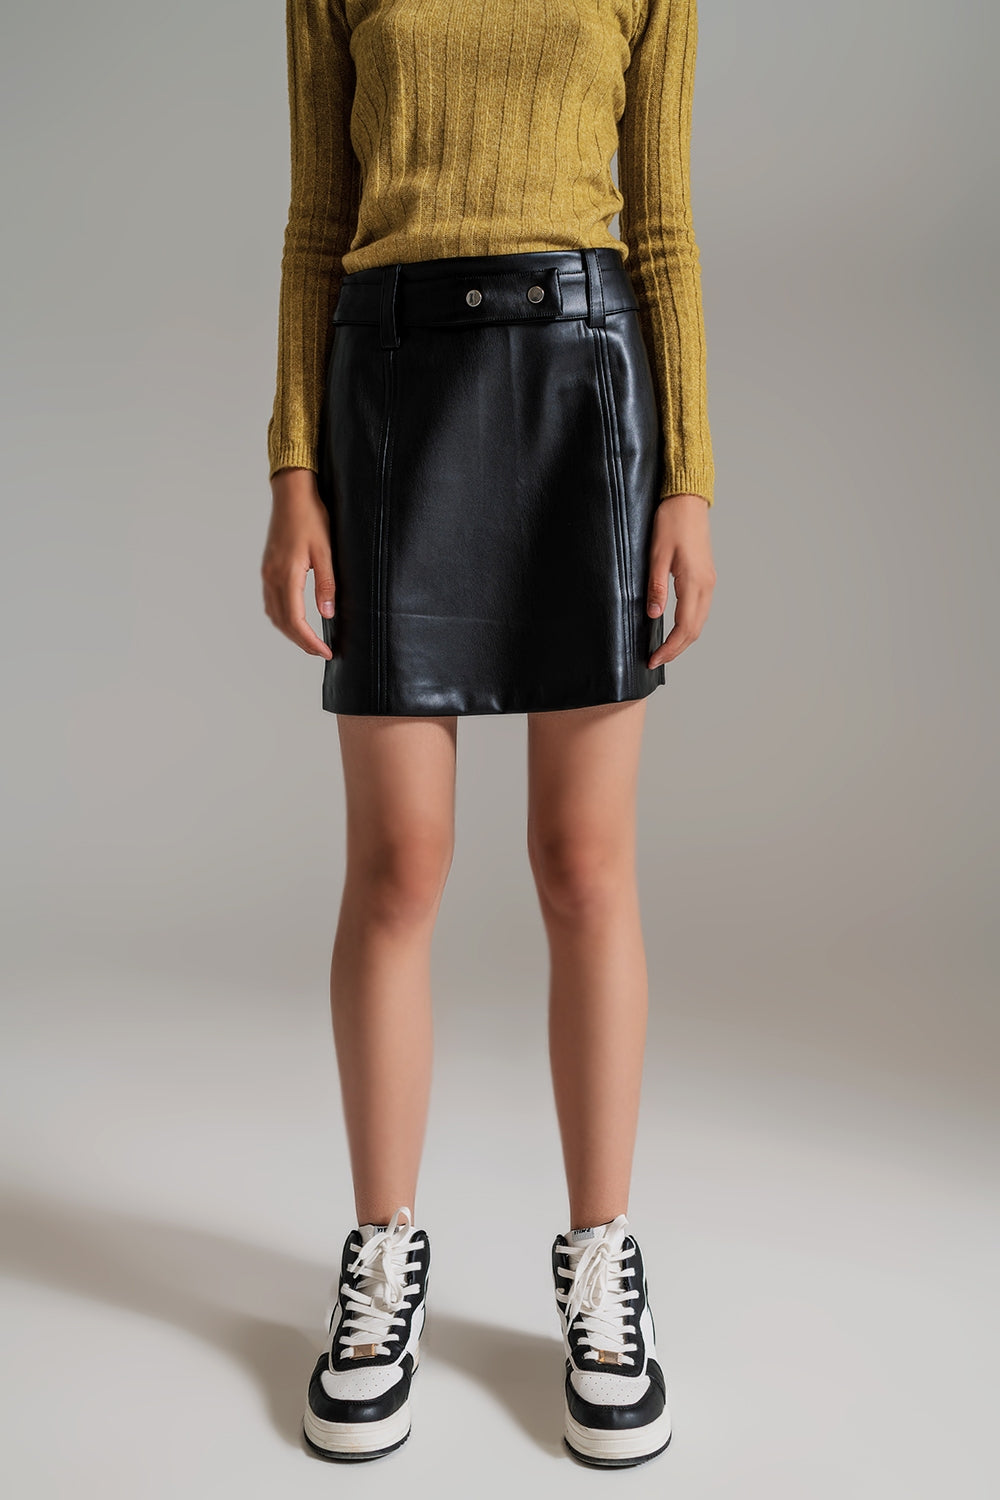 Q2 Black Straight faux leather mini skirt with belt